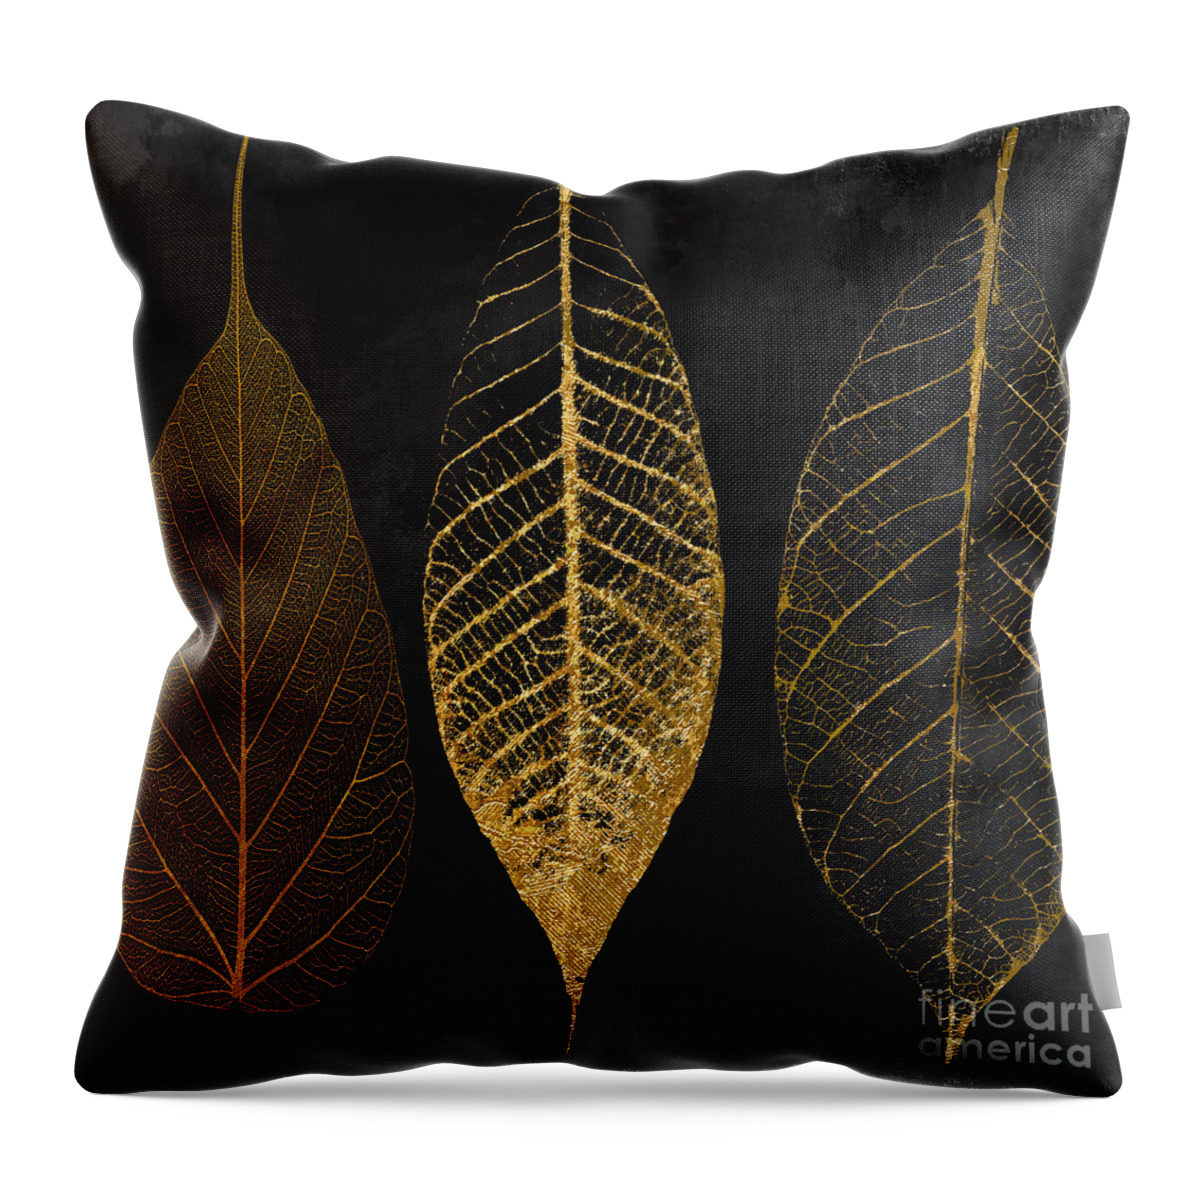 Leaf Throw Pillow featuring the painting Fallen Gold II Autumn Leaves by Mindy Sommers